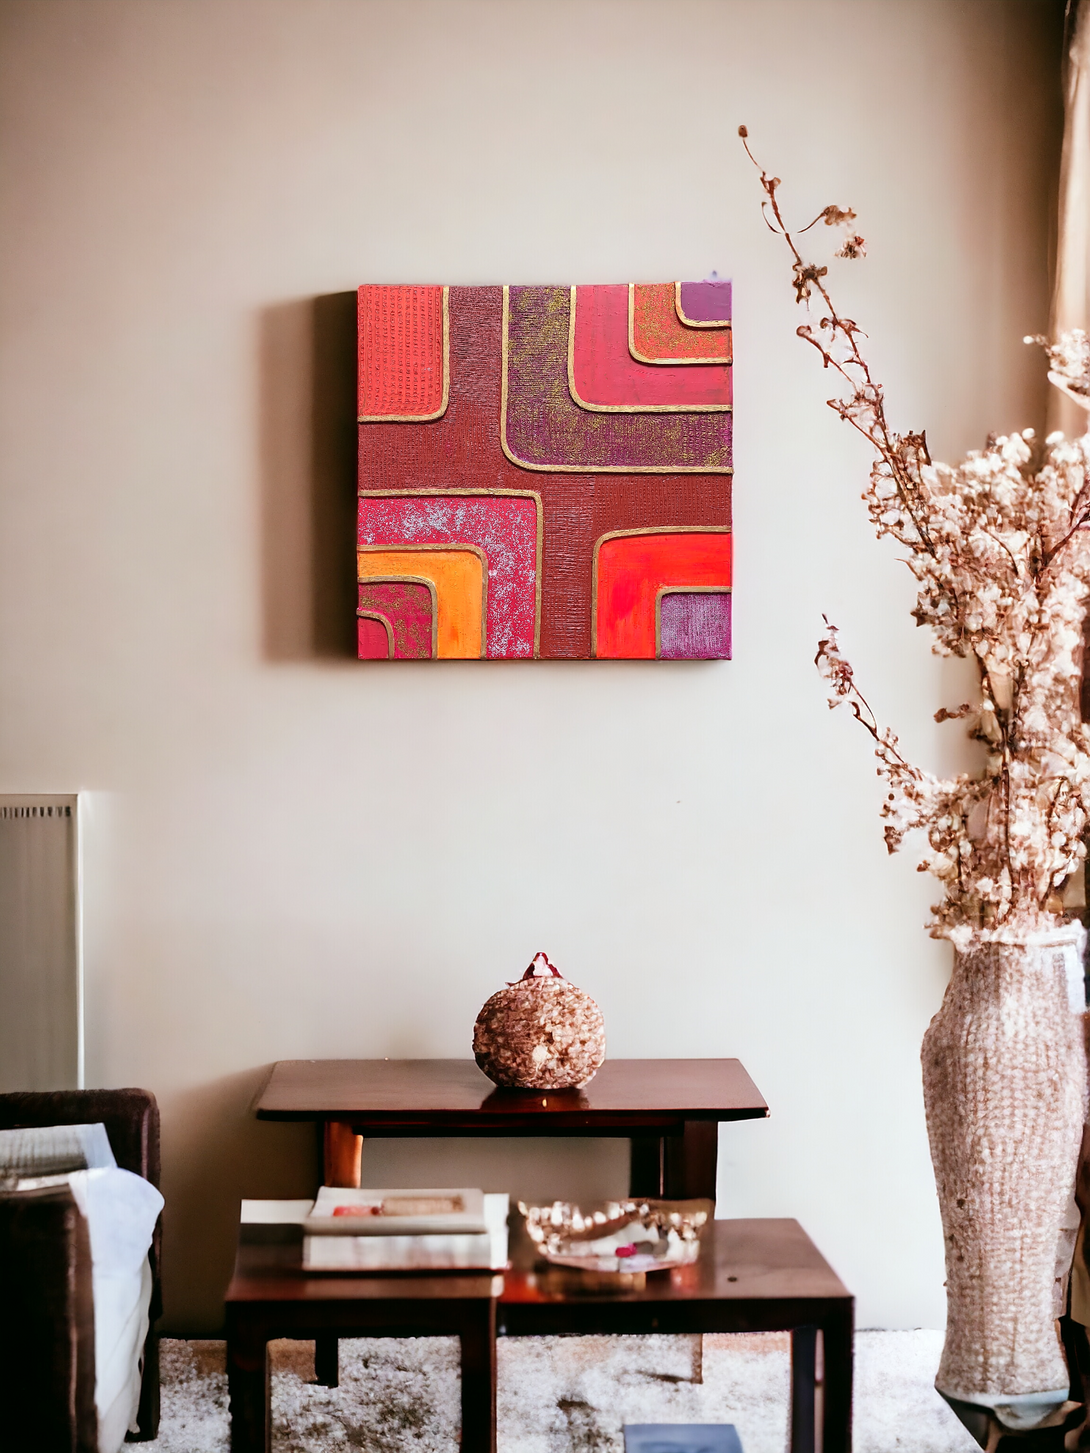 Textured Abstract Painting: Red, Pink, Gold, Glitter Accents